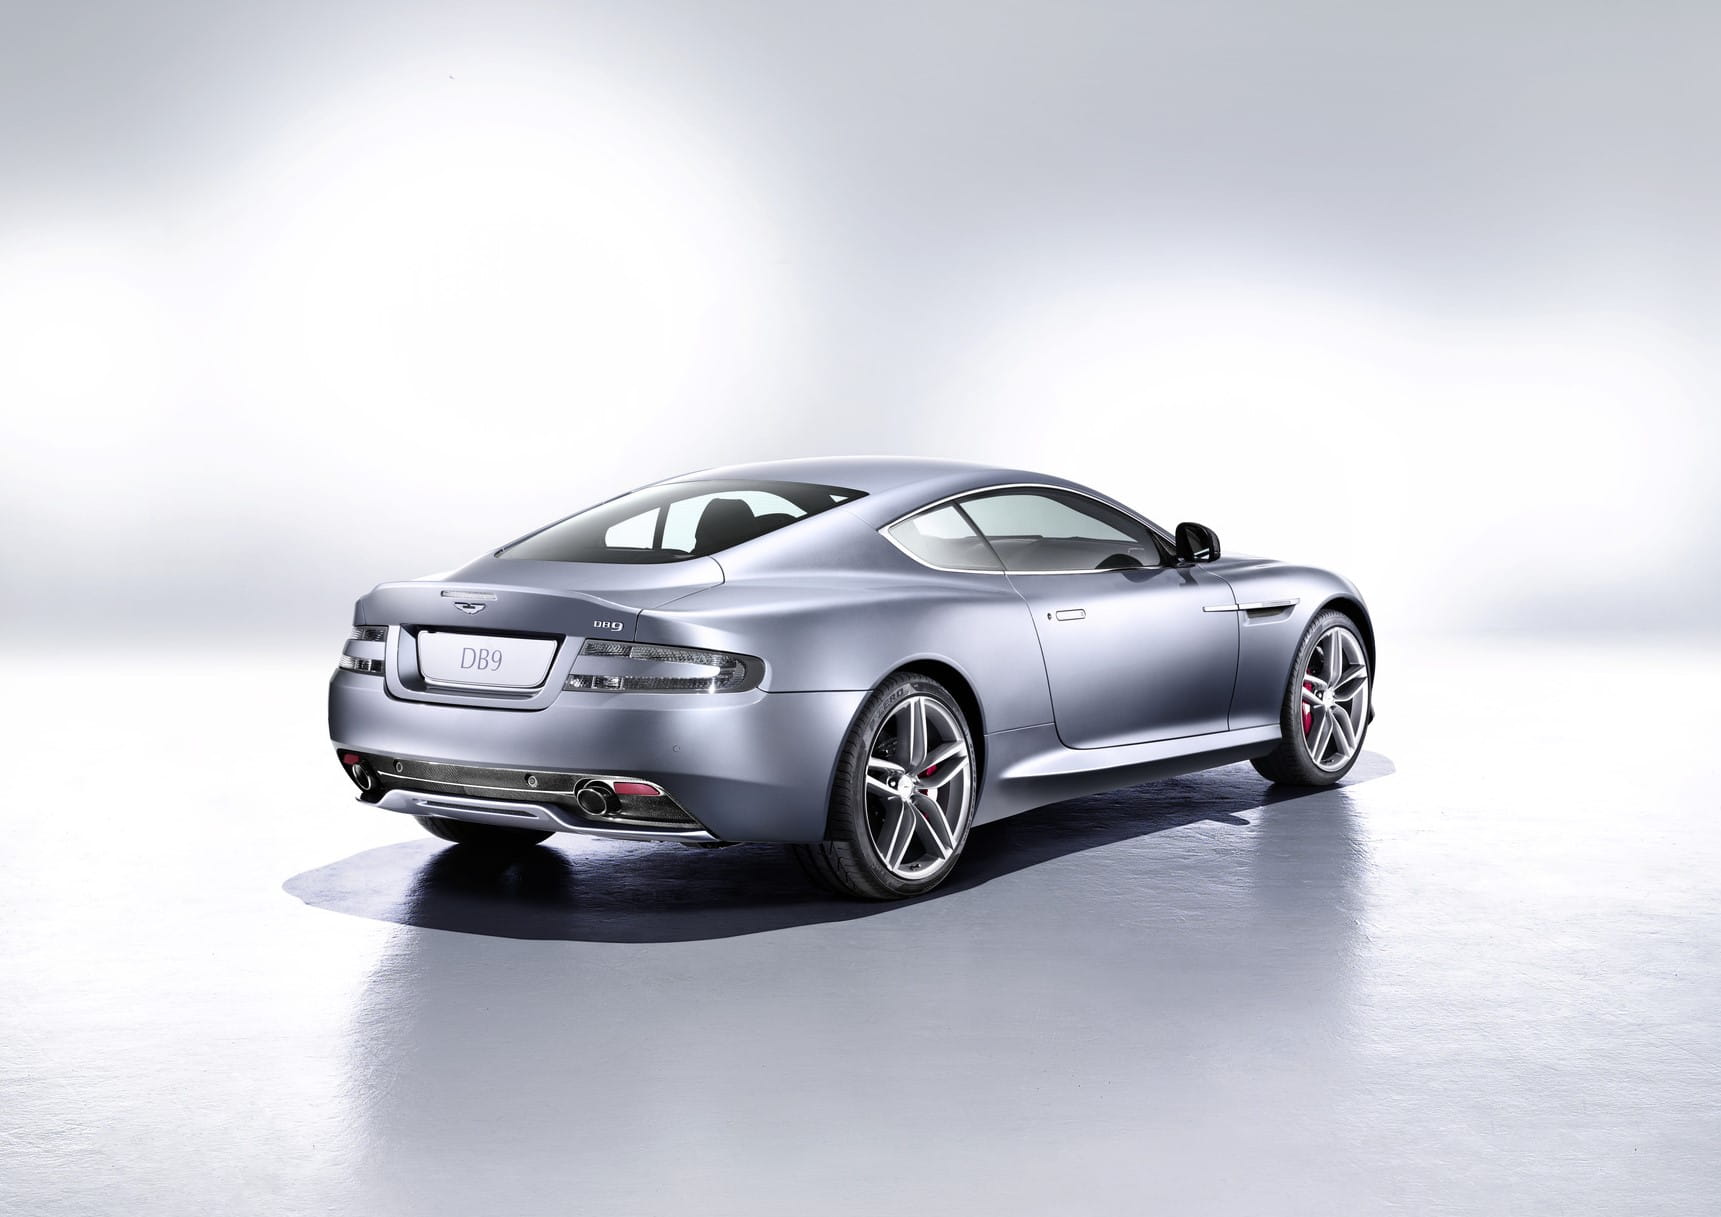 2015 Aston Martin DB9 Carbon Edition Wallpapers | SuperCars.net